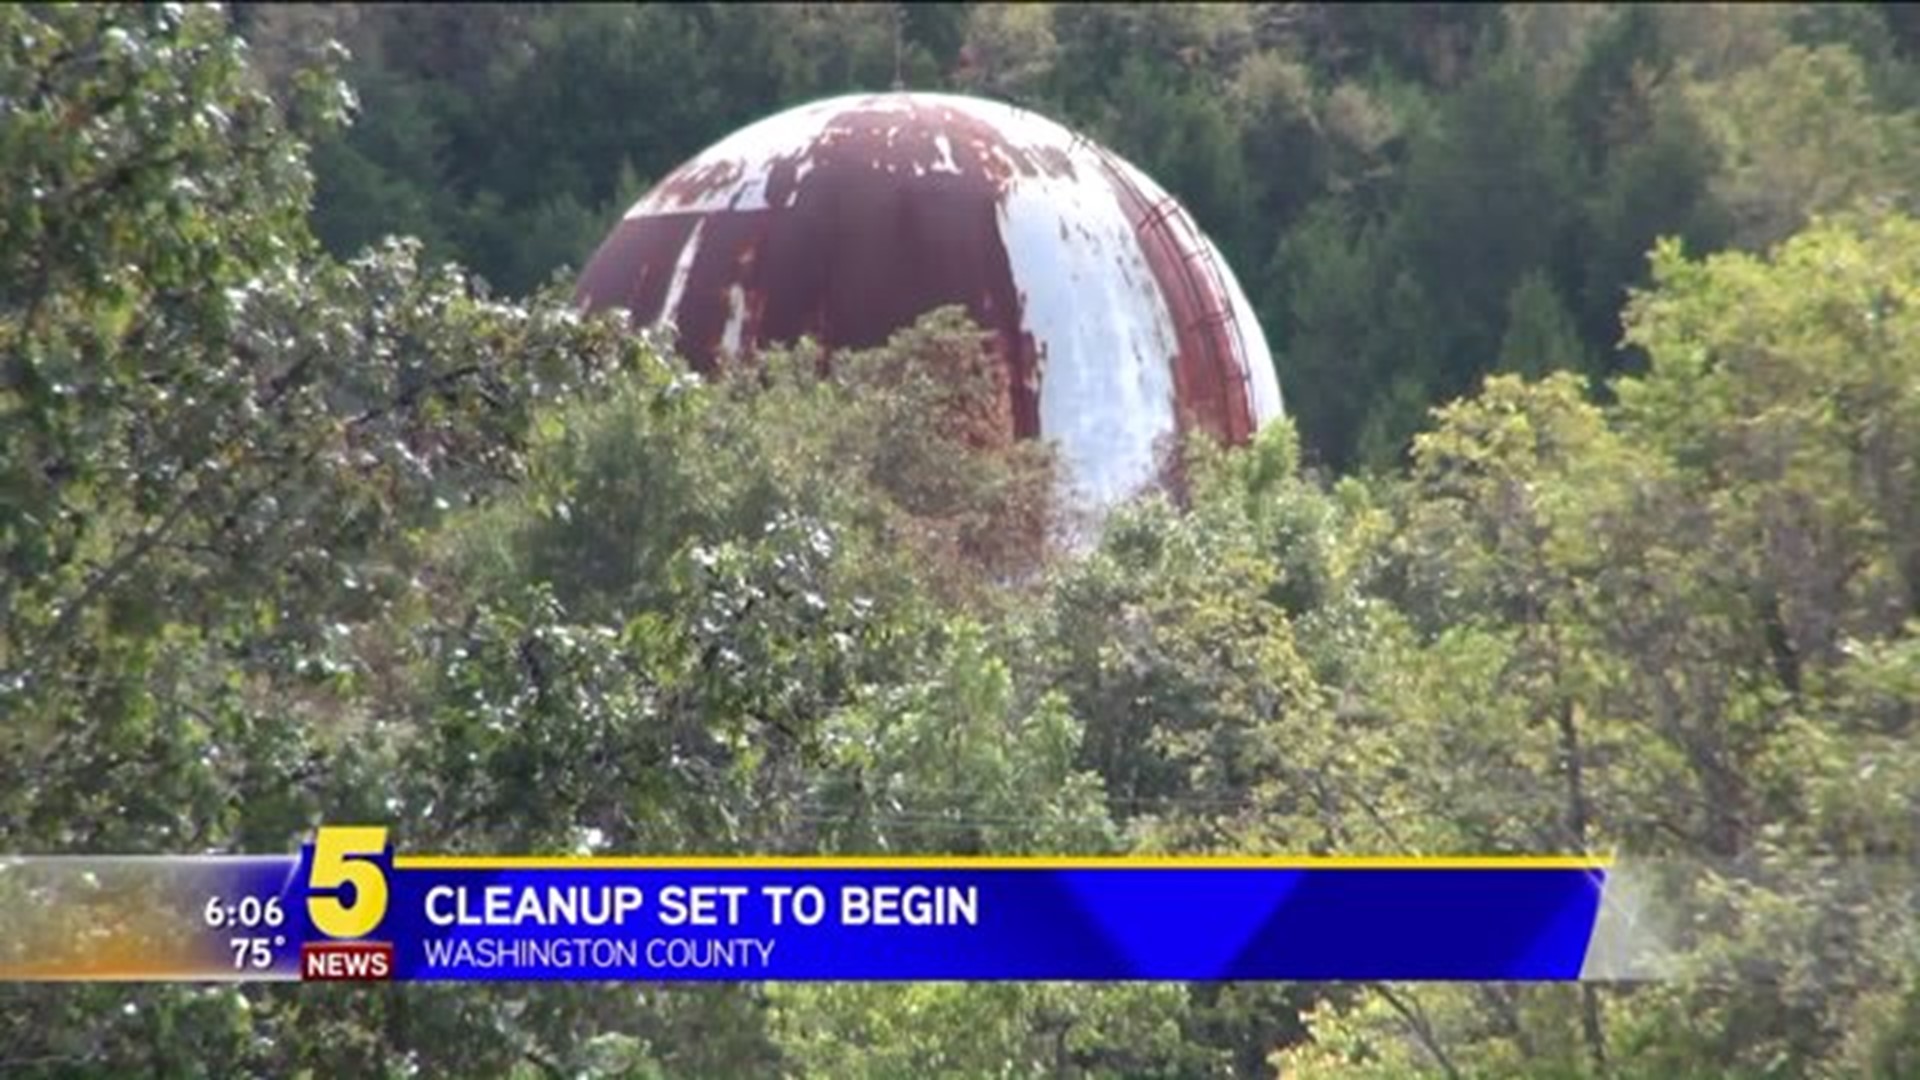 NUCLEAR REACTOR SITE TO BE CLEANED UP